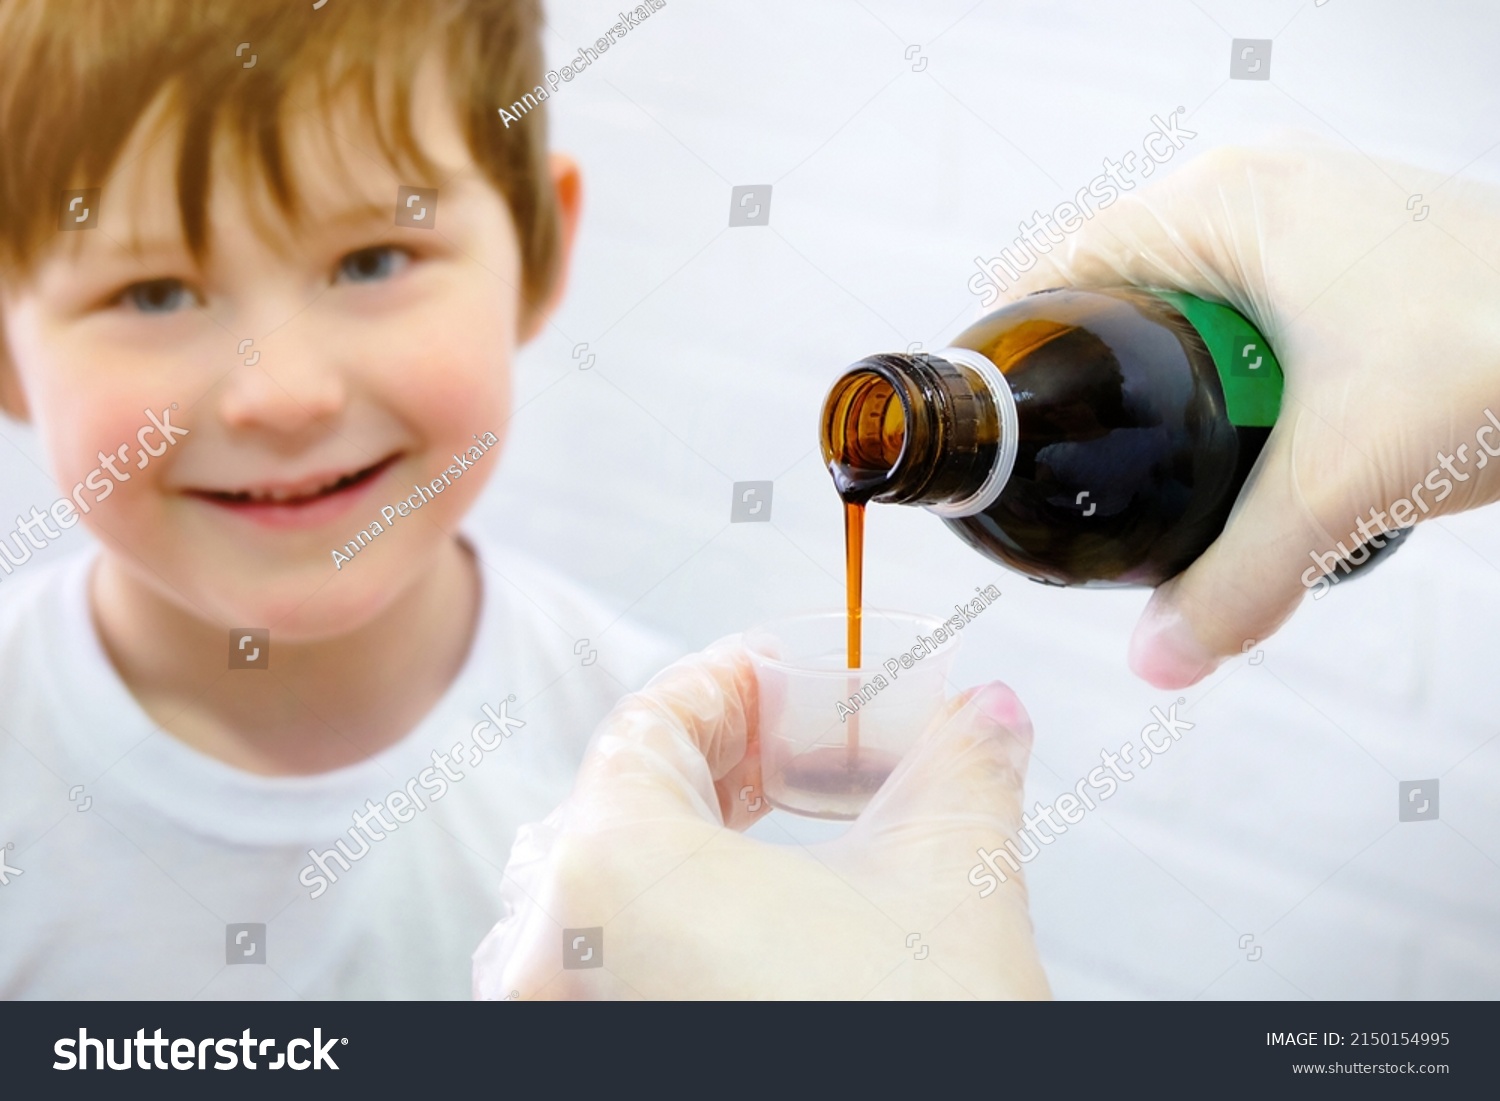 Happy little boy, smiling, wants to take the cure for the disease. Hands pouring cough medicine into a special measuring cap. Horizontal photo. #2150154995